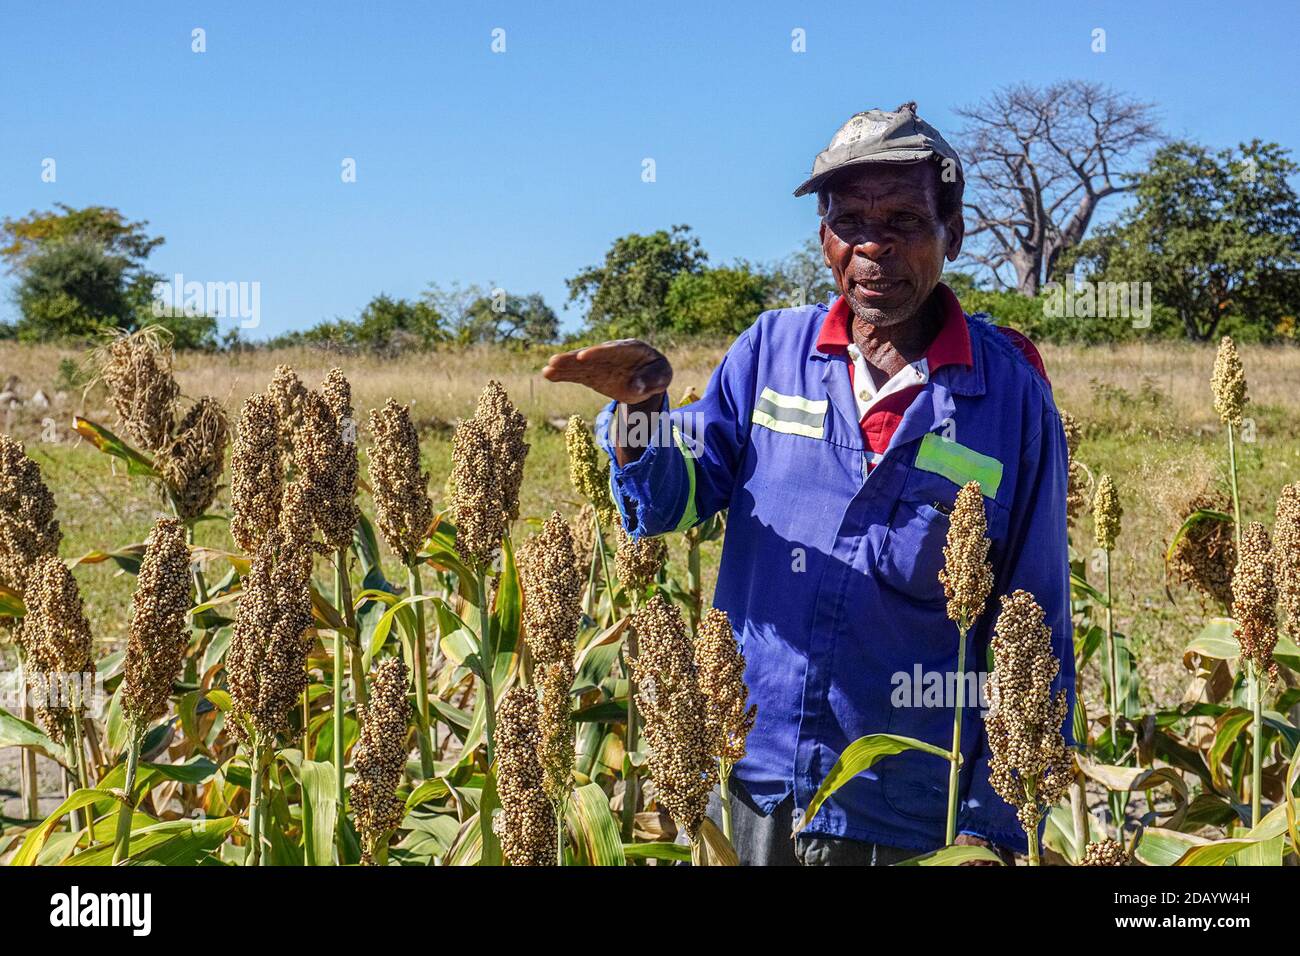 Thanks to limited rainfall and intense heat, Chokudla says his maize crop was “make-believe” this year. Stock Photo